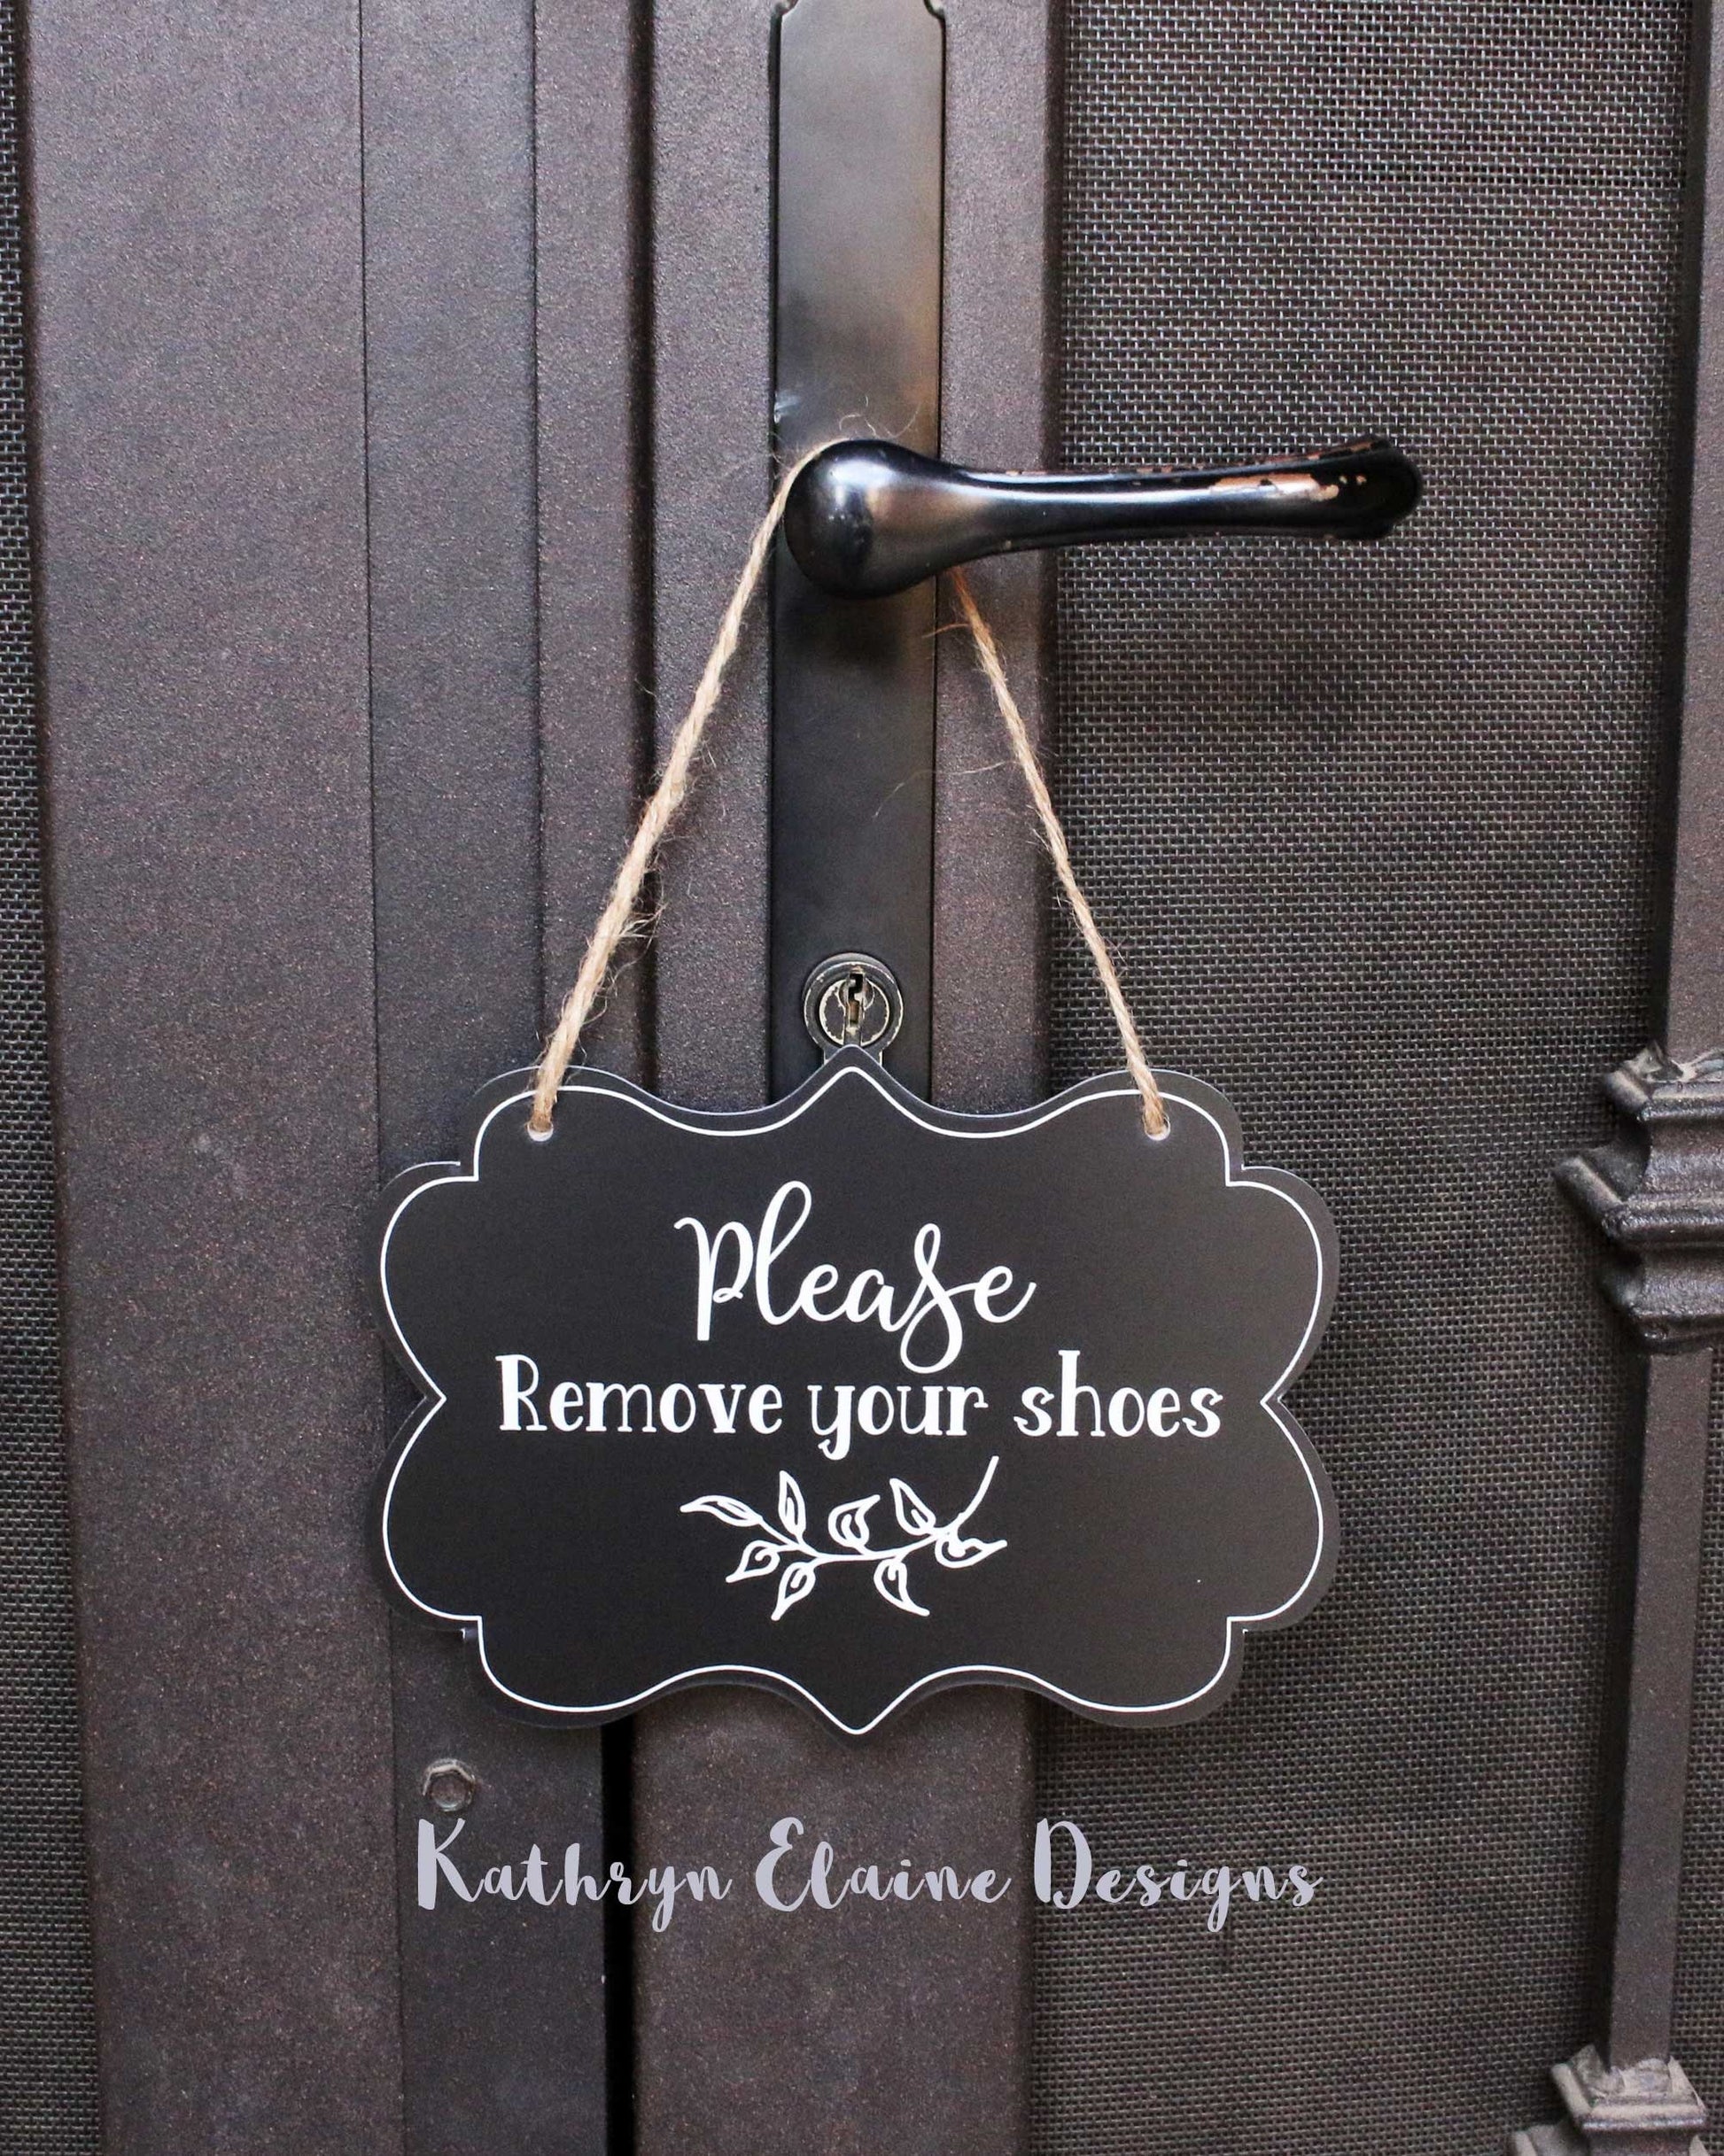 Black laminate scalloped edge sign with white lettering stating Please remove your shoes with leaf design and border on screen door